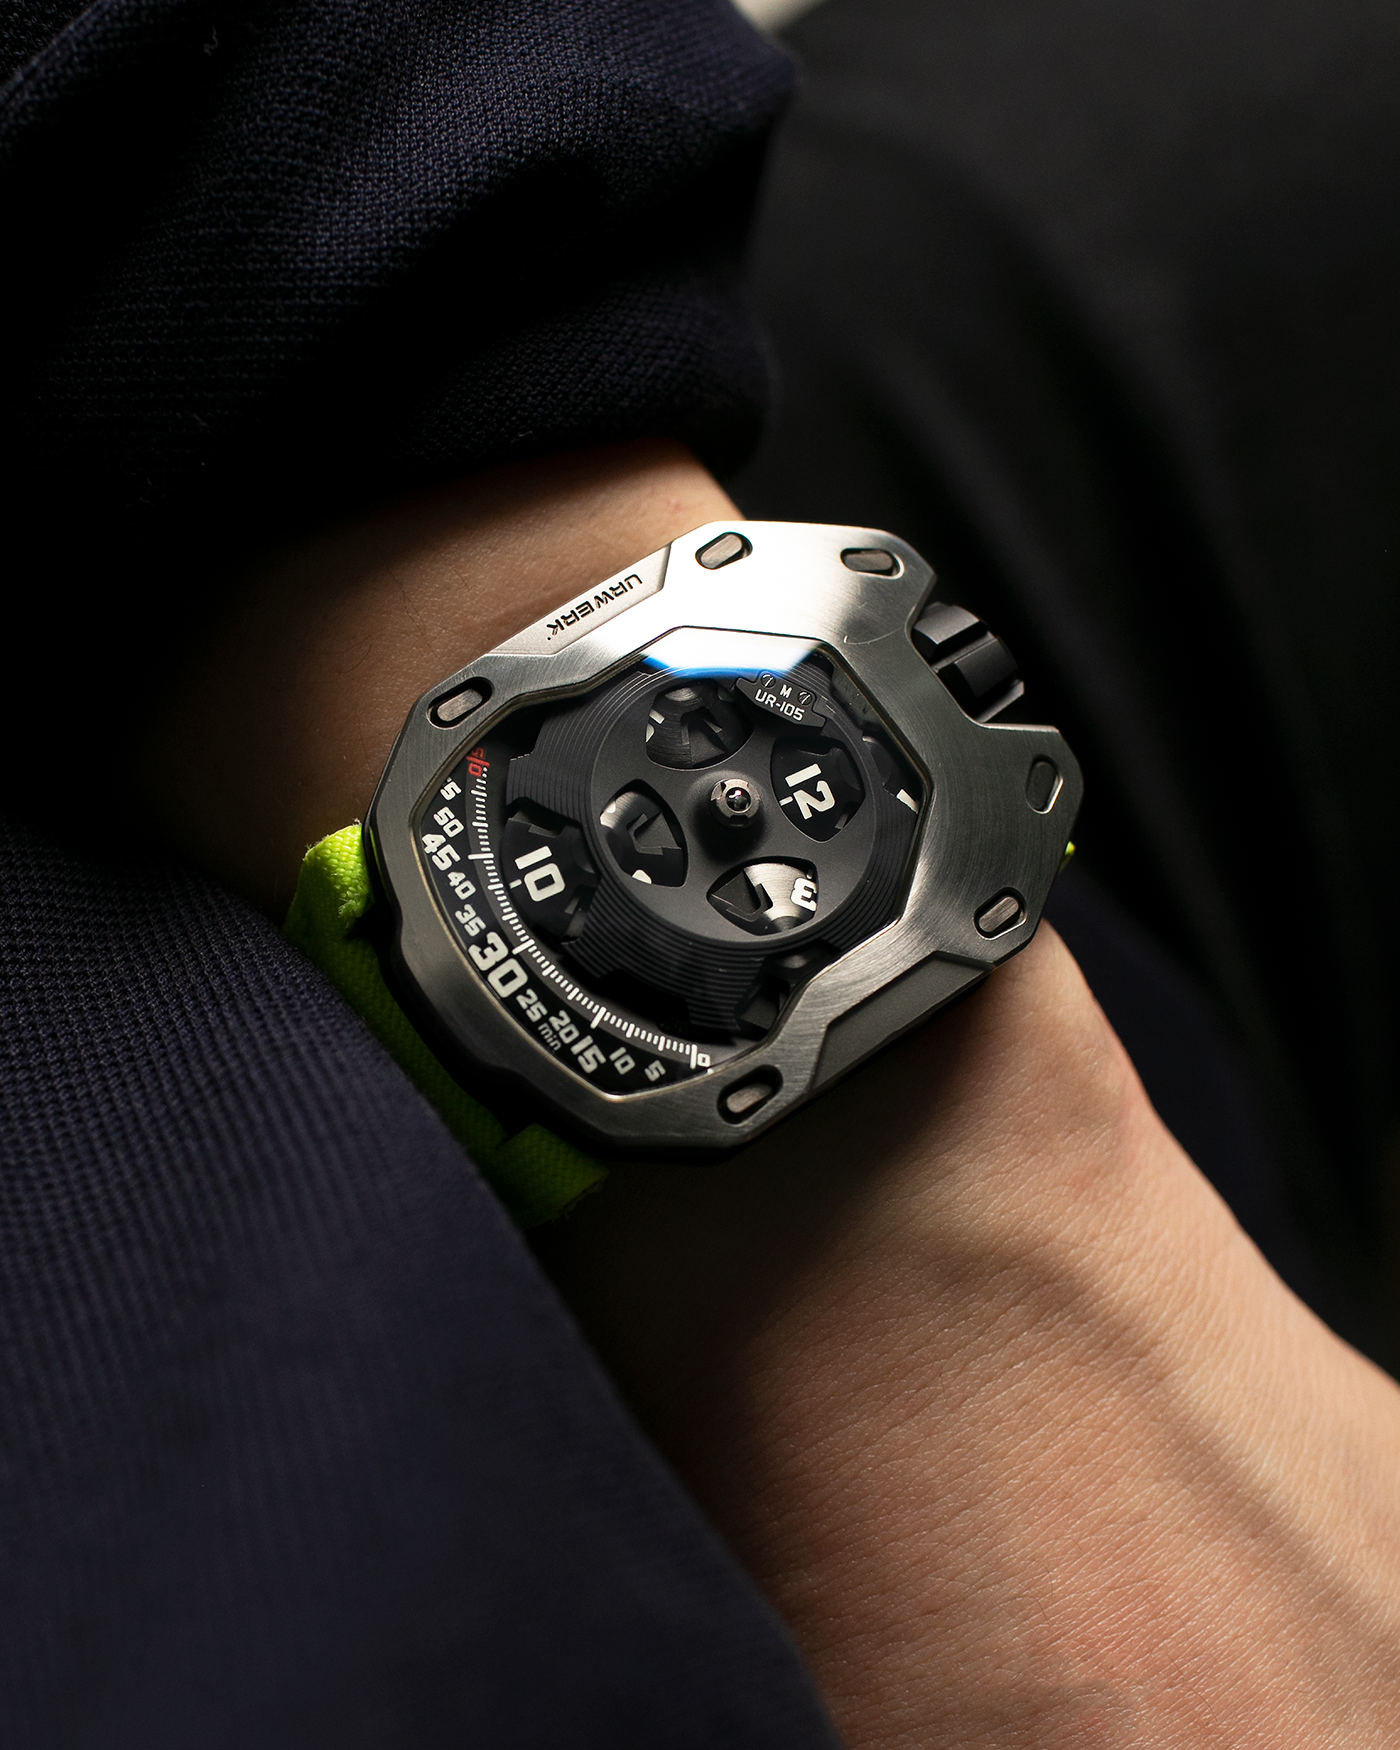 Brand: Urwerk Year: 2014 Model: UR105M “Iron Knight”, Limited to 77 pieces Material: Stainless Steel, Titanium Movement: Urwerk Cal. 5.01, Manual-Winding Case Dimensions: 39.50mm x 53mm x 16.65mm Strap: Urwerk Fluorescent Yellow Textile Strap with Signed Titanium Tang Buckle